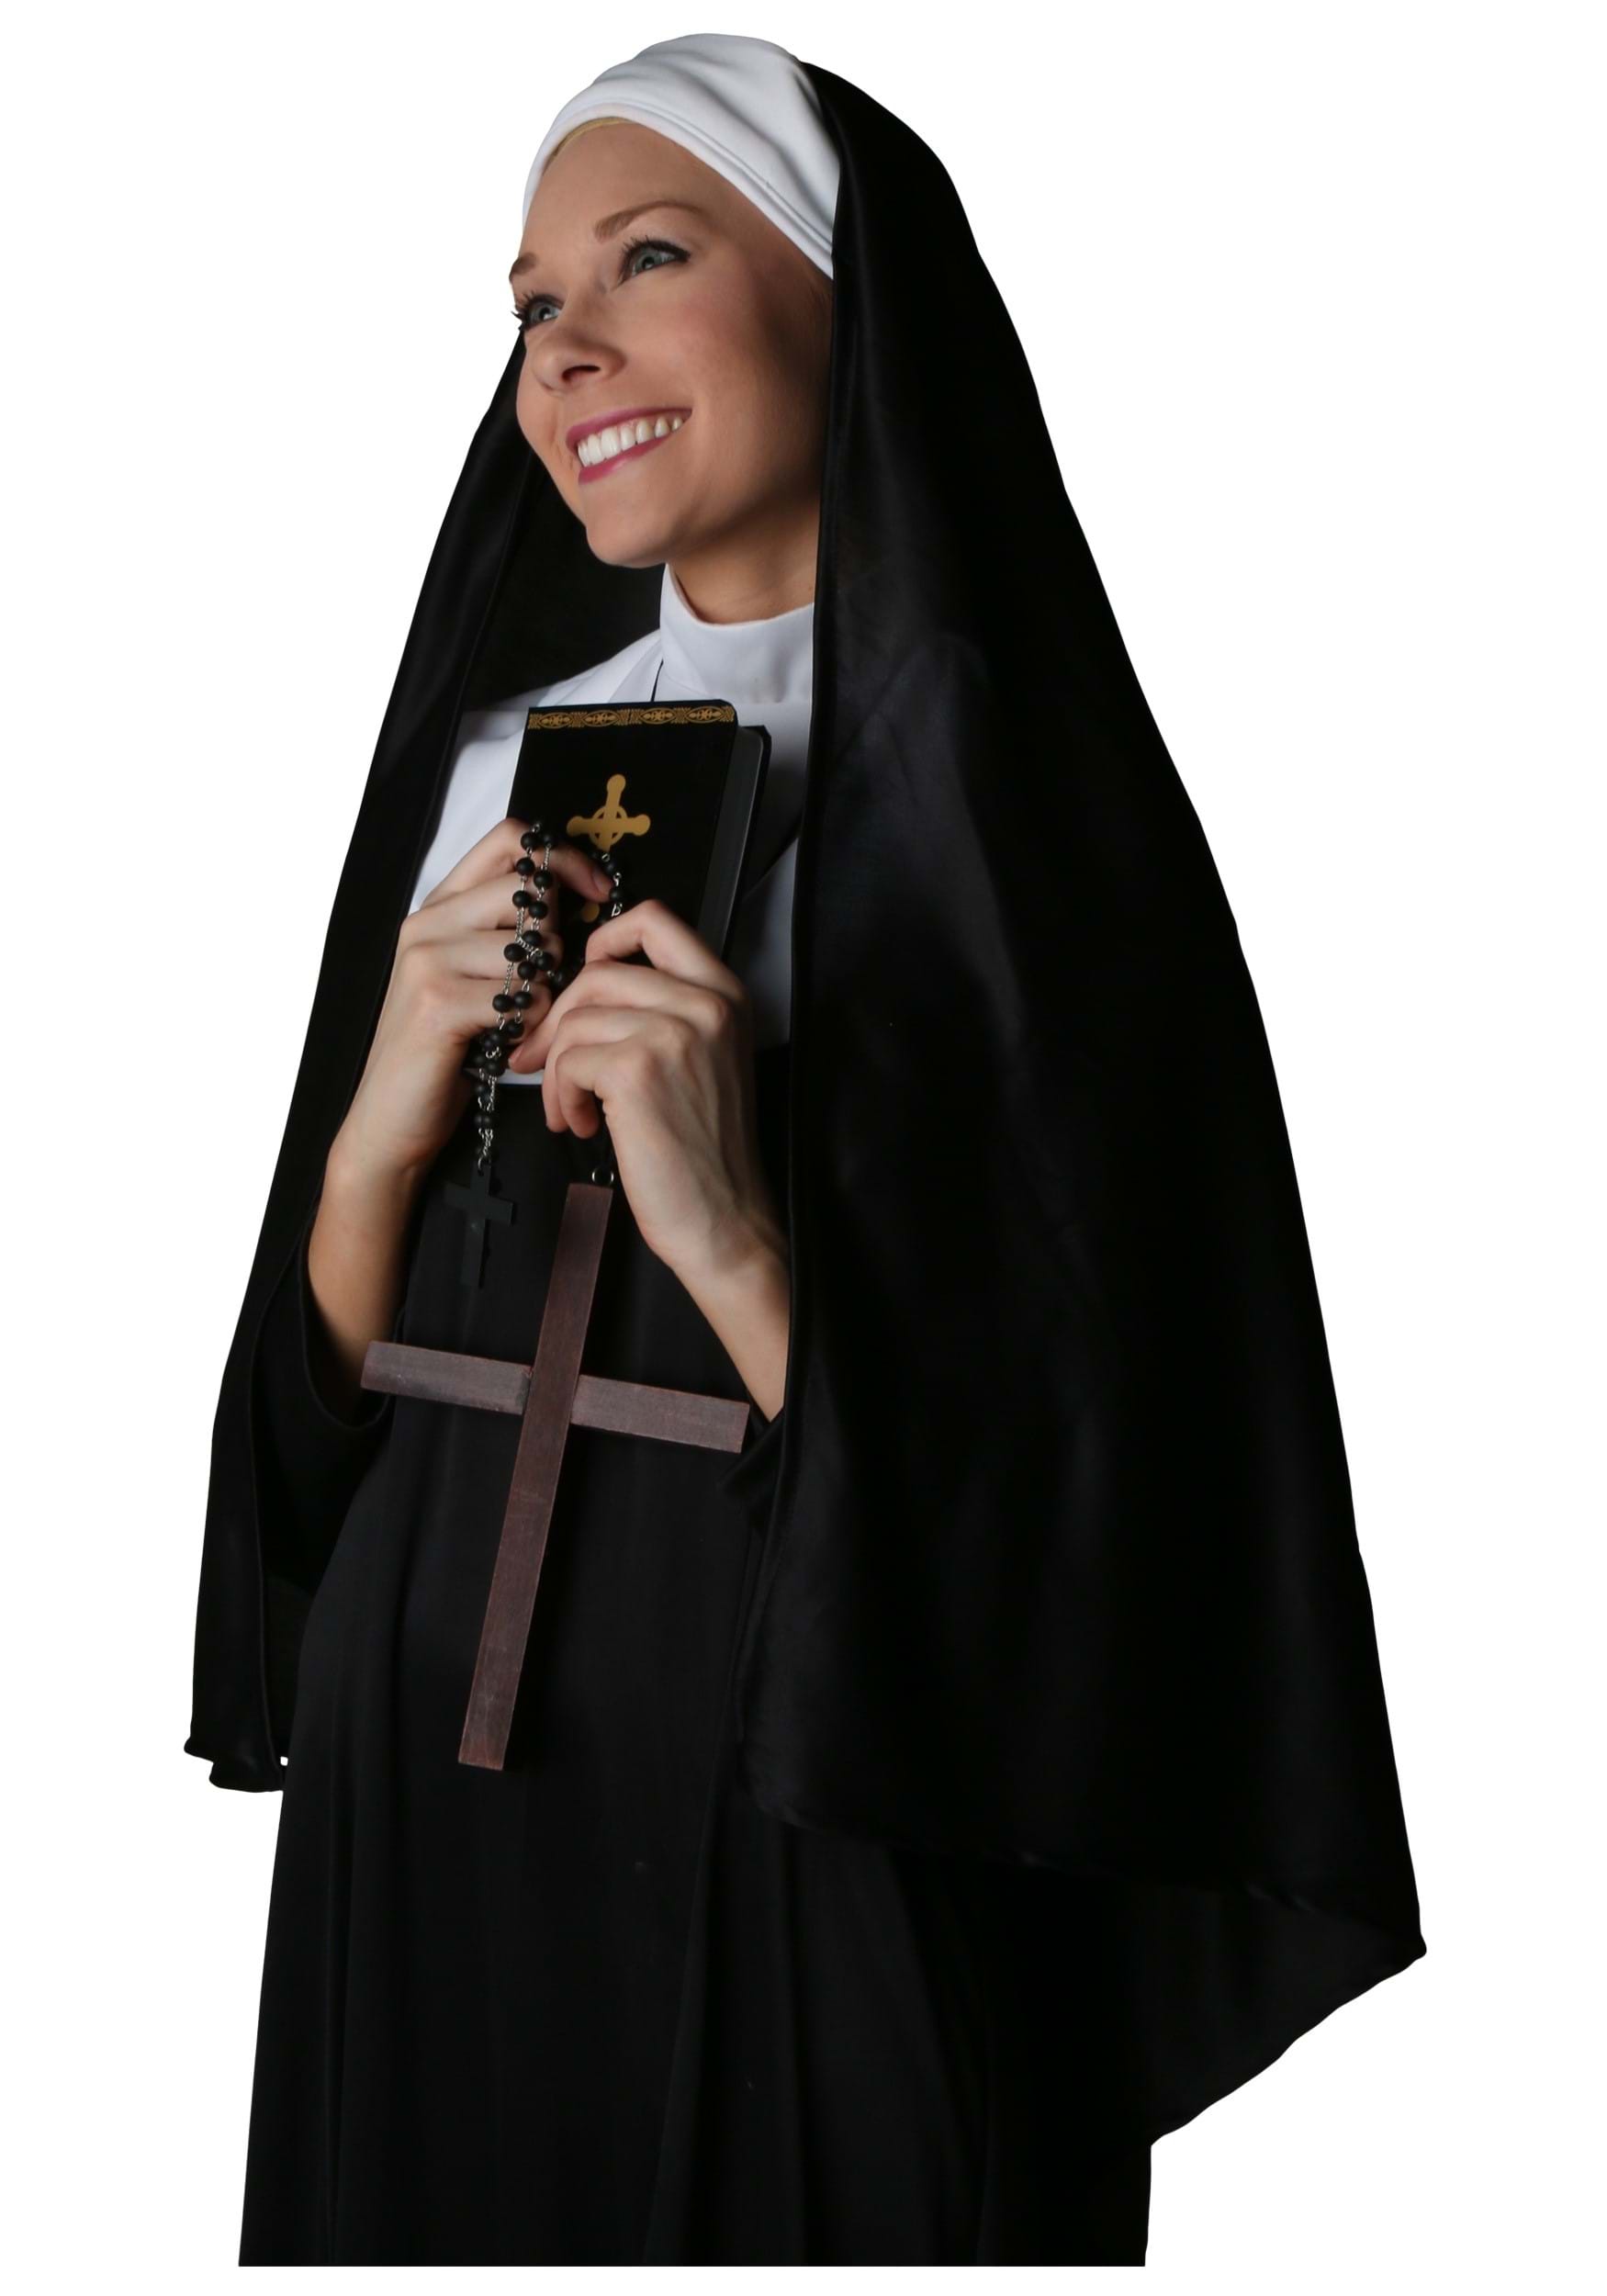 Fun Shack Womens Classic Nun Costume Adults Traditional Religious Sister Dress Outfit Medium